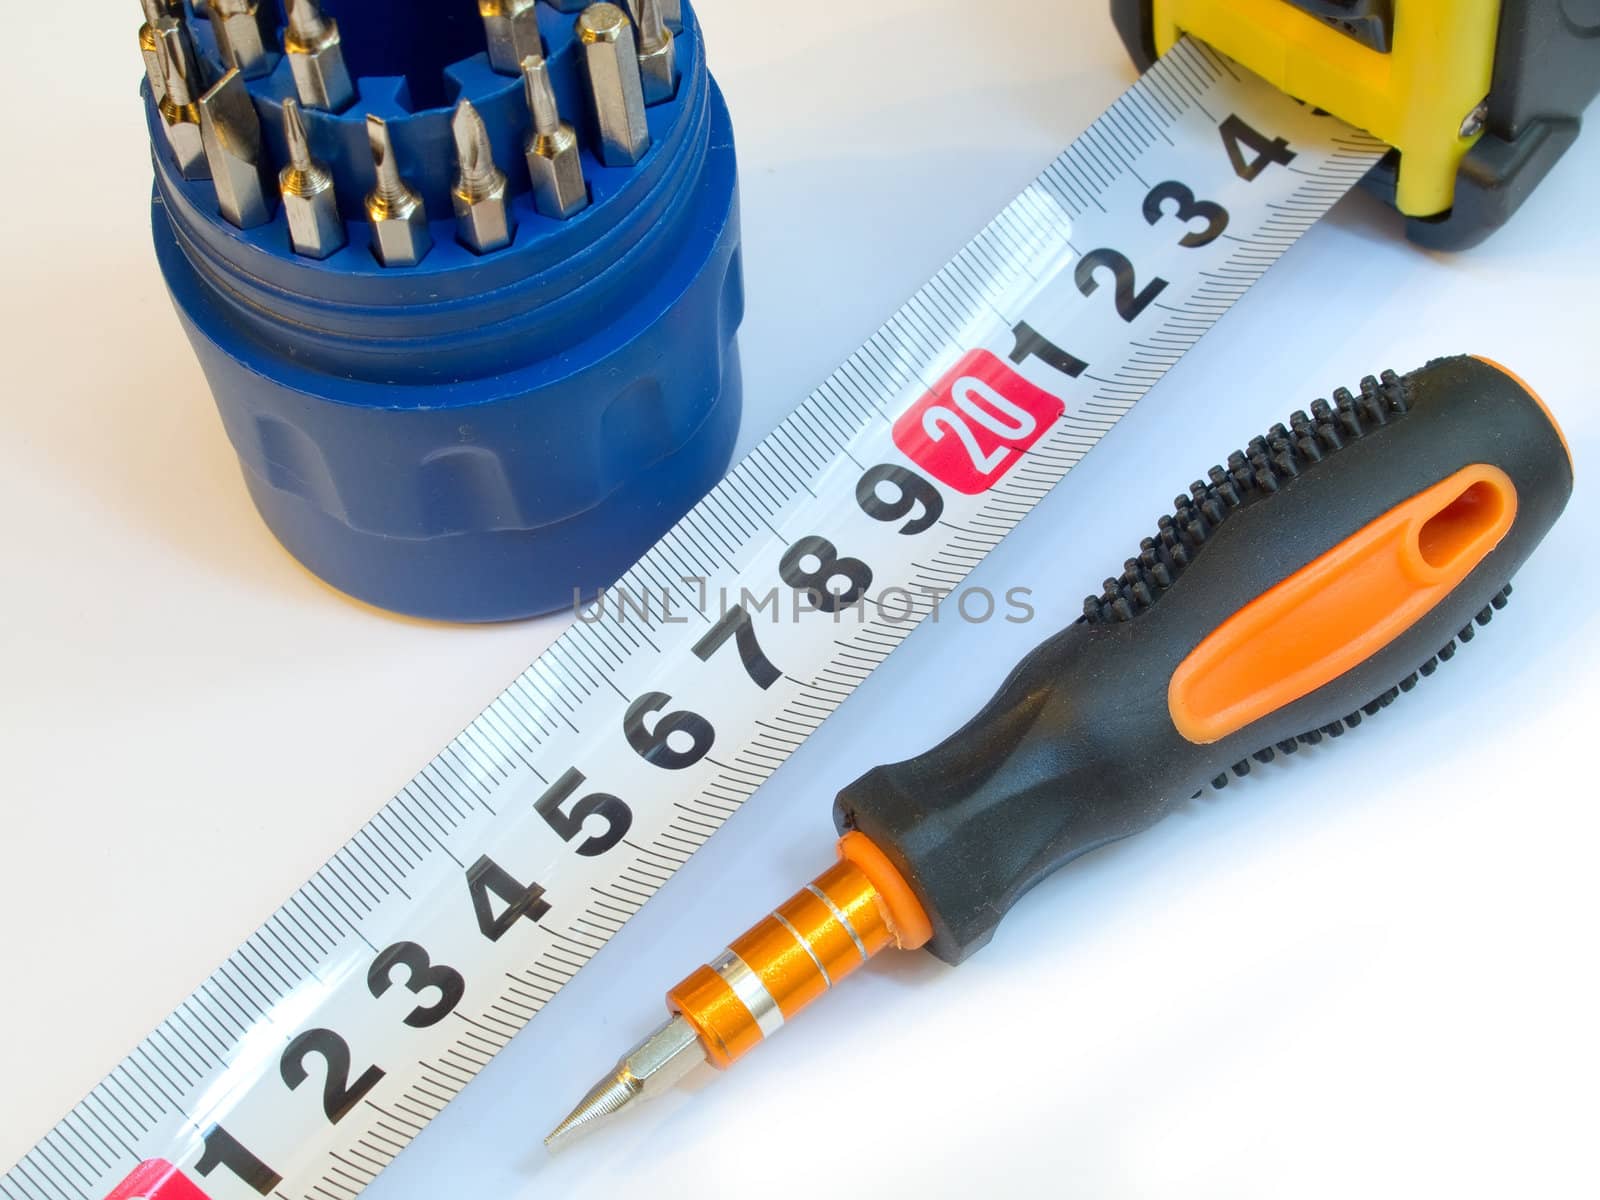 Screwdriver tools set with measure tape